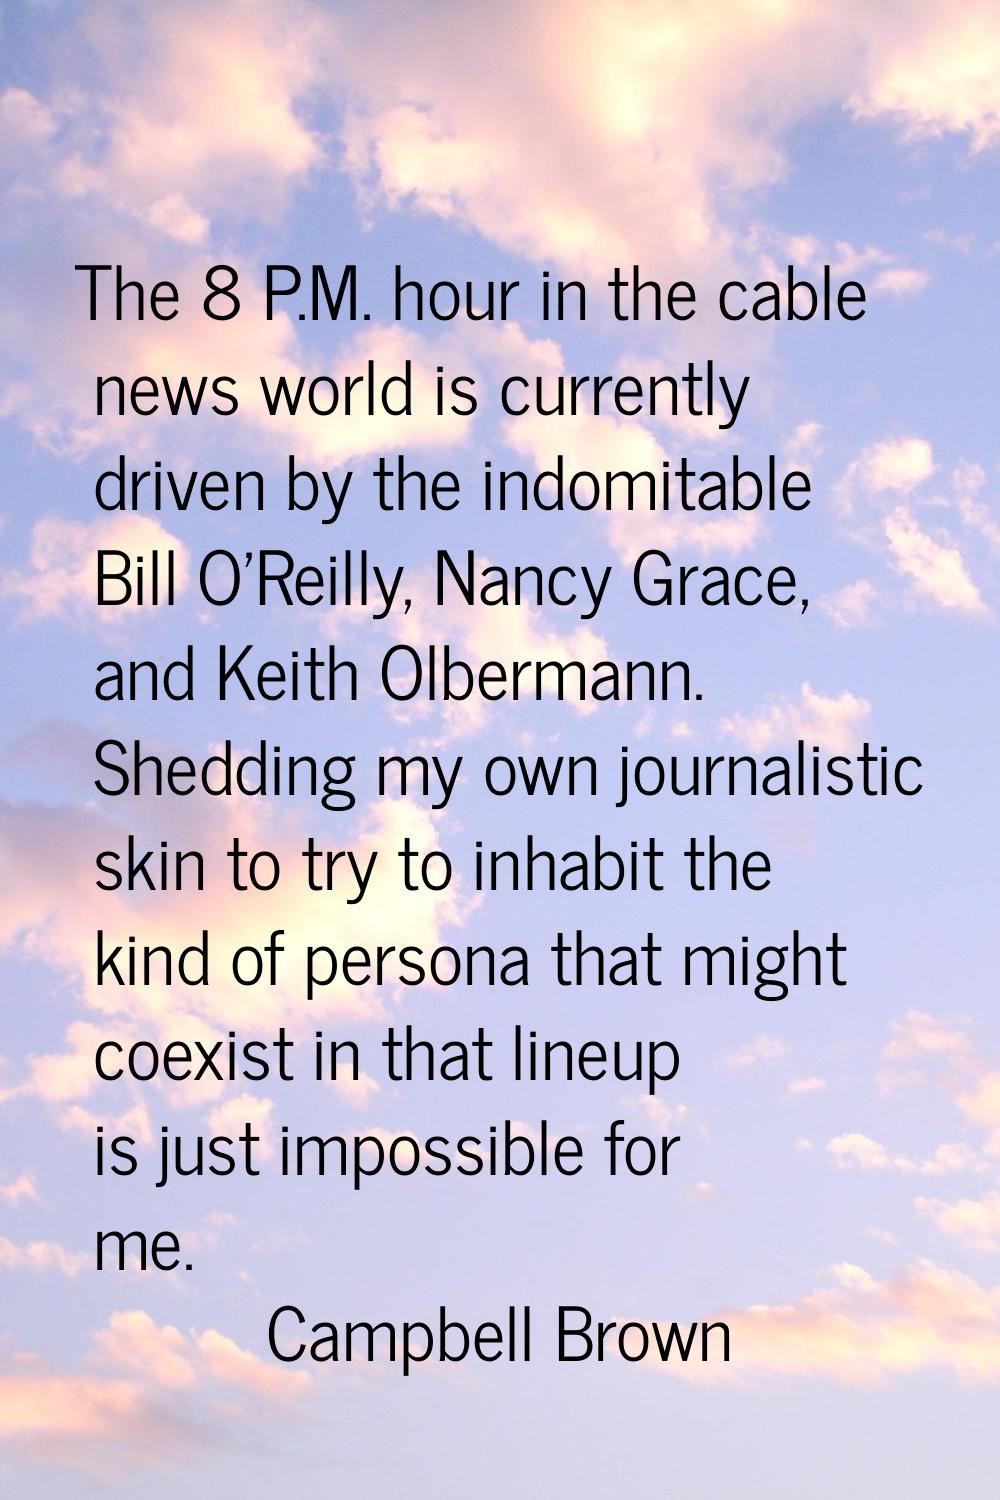 The 8 P.M. hour in the cable news world is currently driven by the indomitable Bill O'Reilly, Nancy